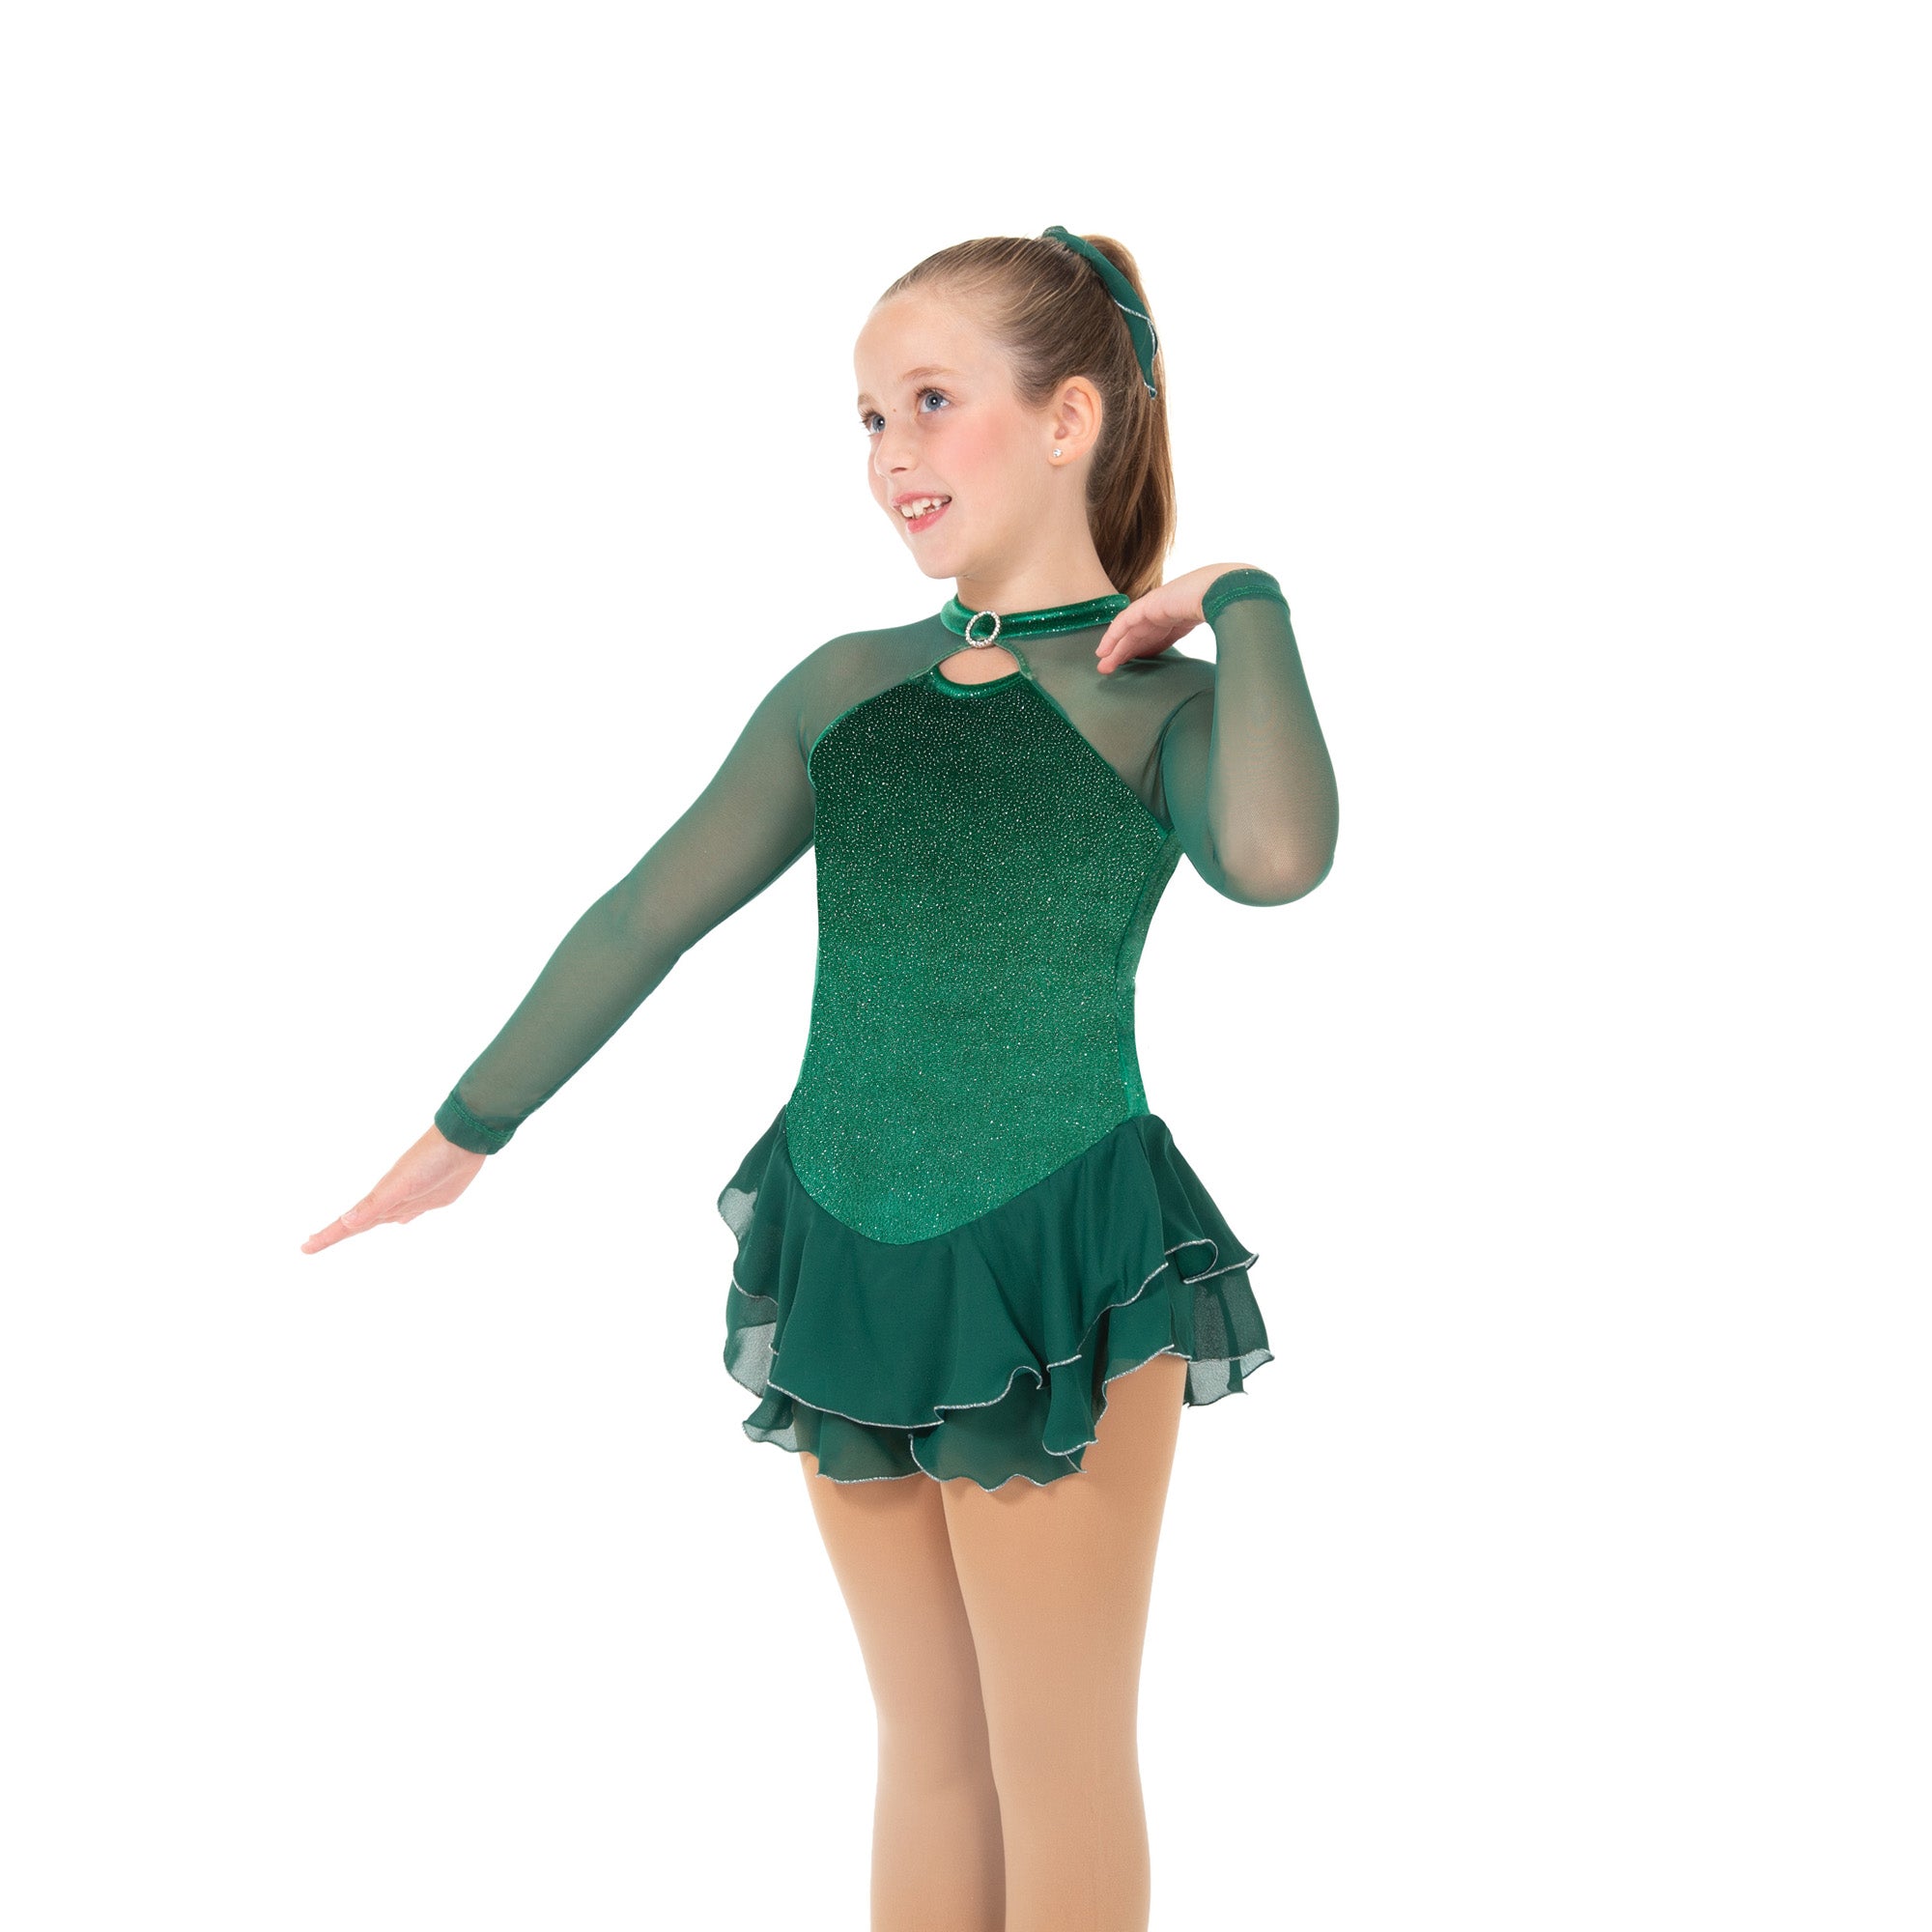 179 Shimmer Skating Dress in Green by Jerry's